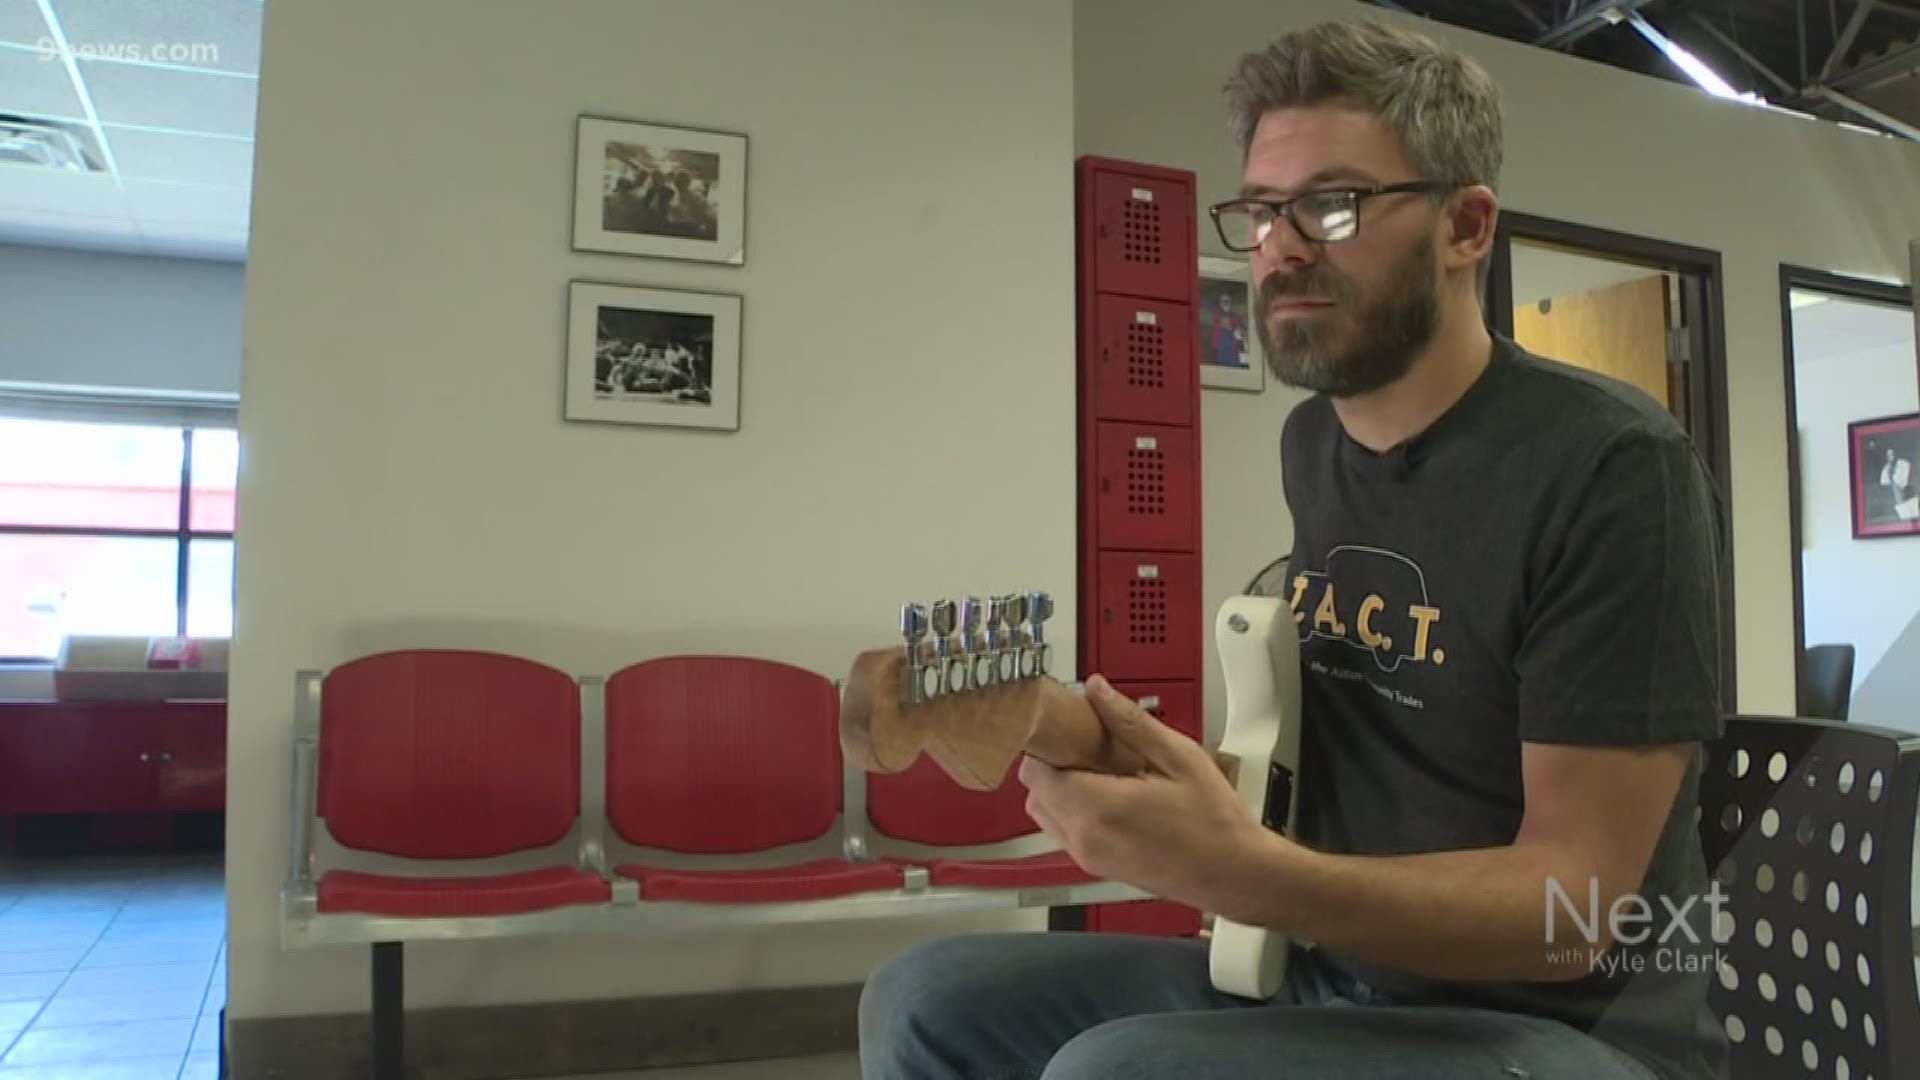 If you've listened to Taylor Swift or Faith Hill, there's a chance you heard Danny Combs in the background. He's a guitarist, now in Denver, pursuing a new passion.